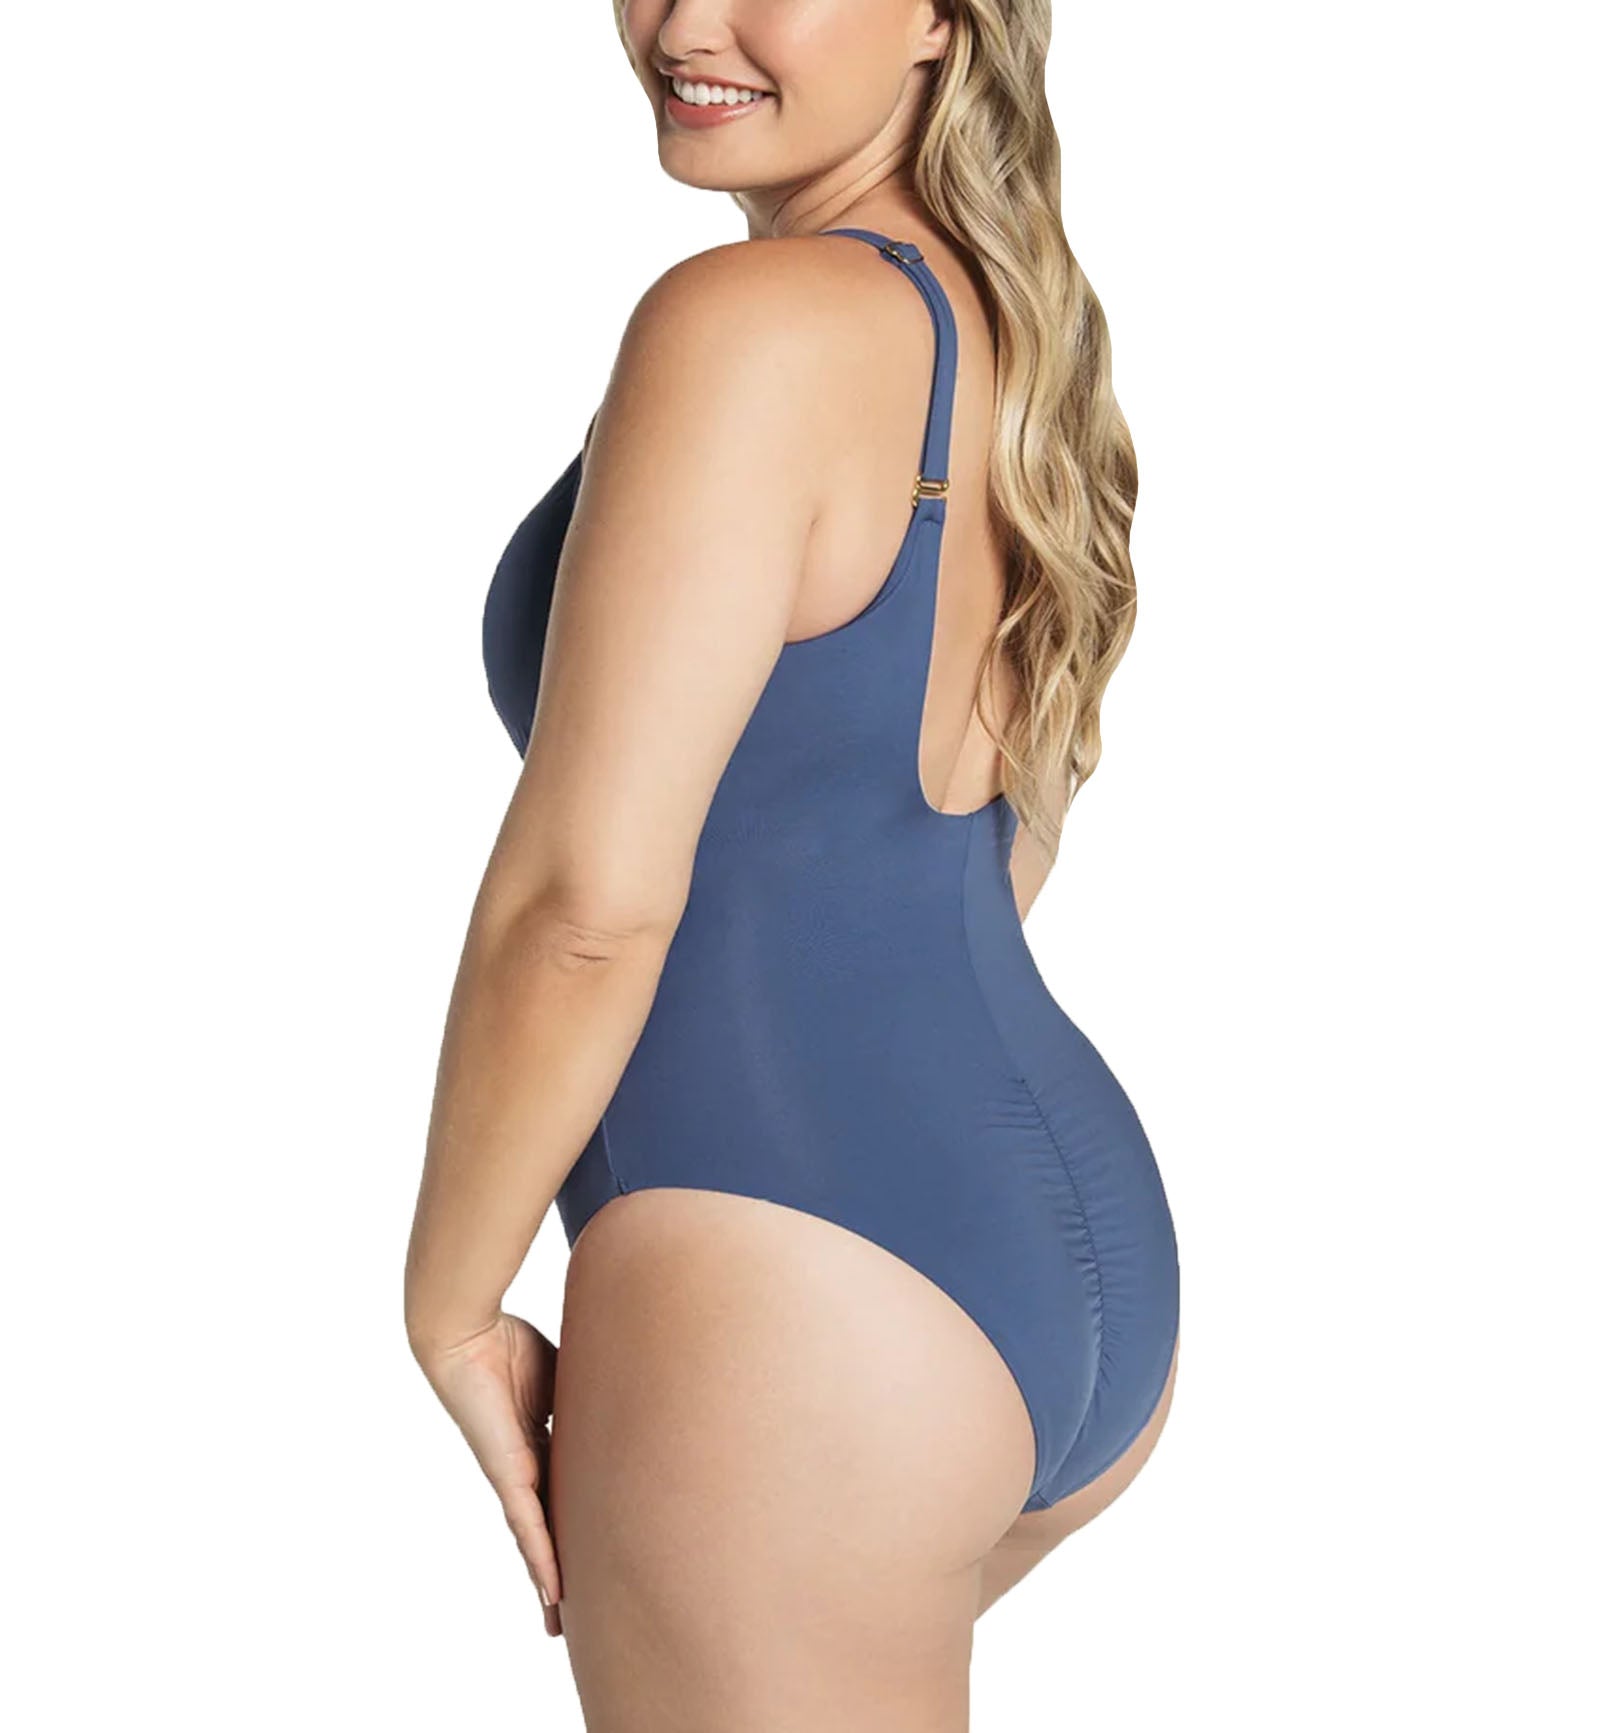 Leonisa Plunge One Piece Slimming Swimsuit (19A129M),Small,Blue - Blue,Small